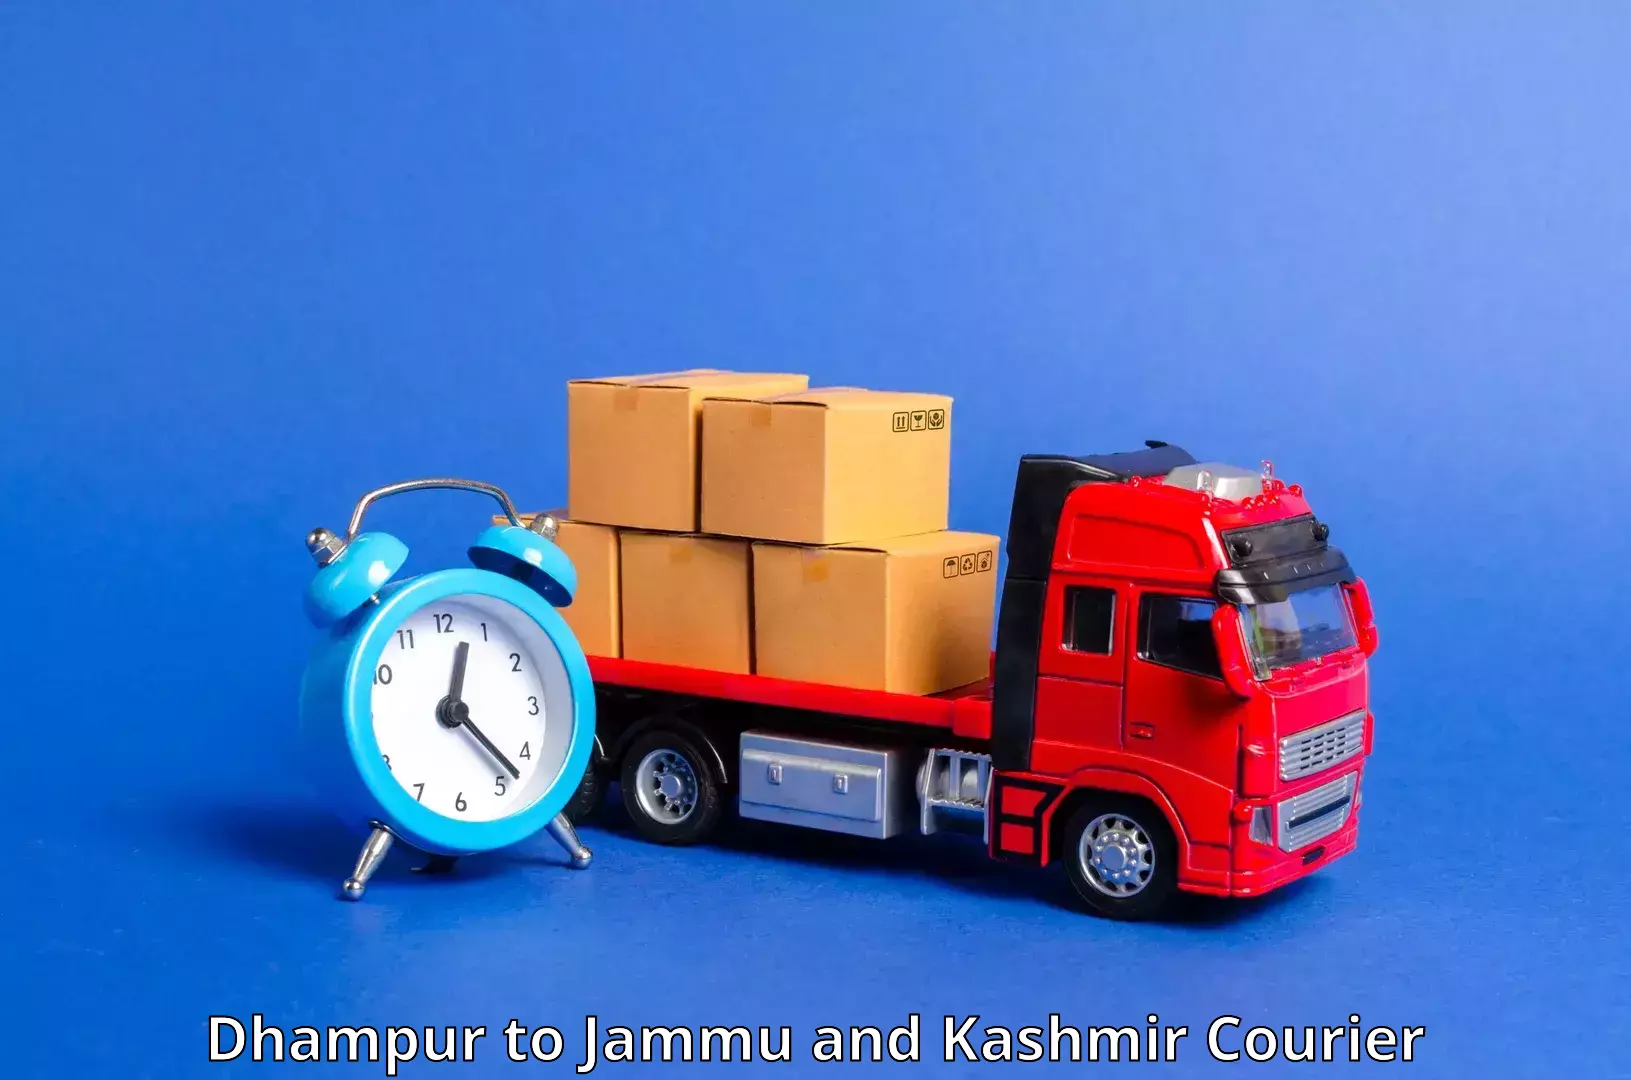 On-demand delivery in Dhampur to Srinagar Kashmir